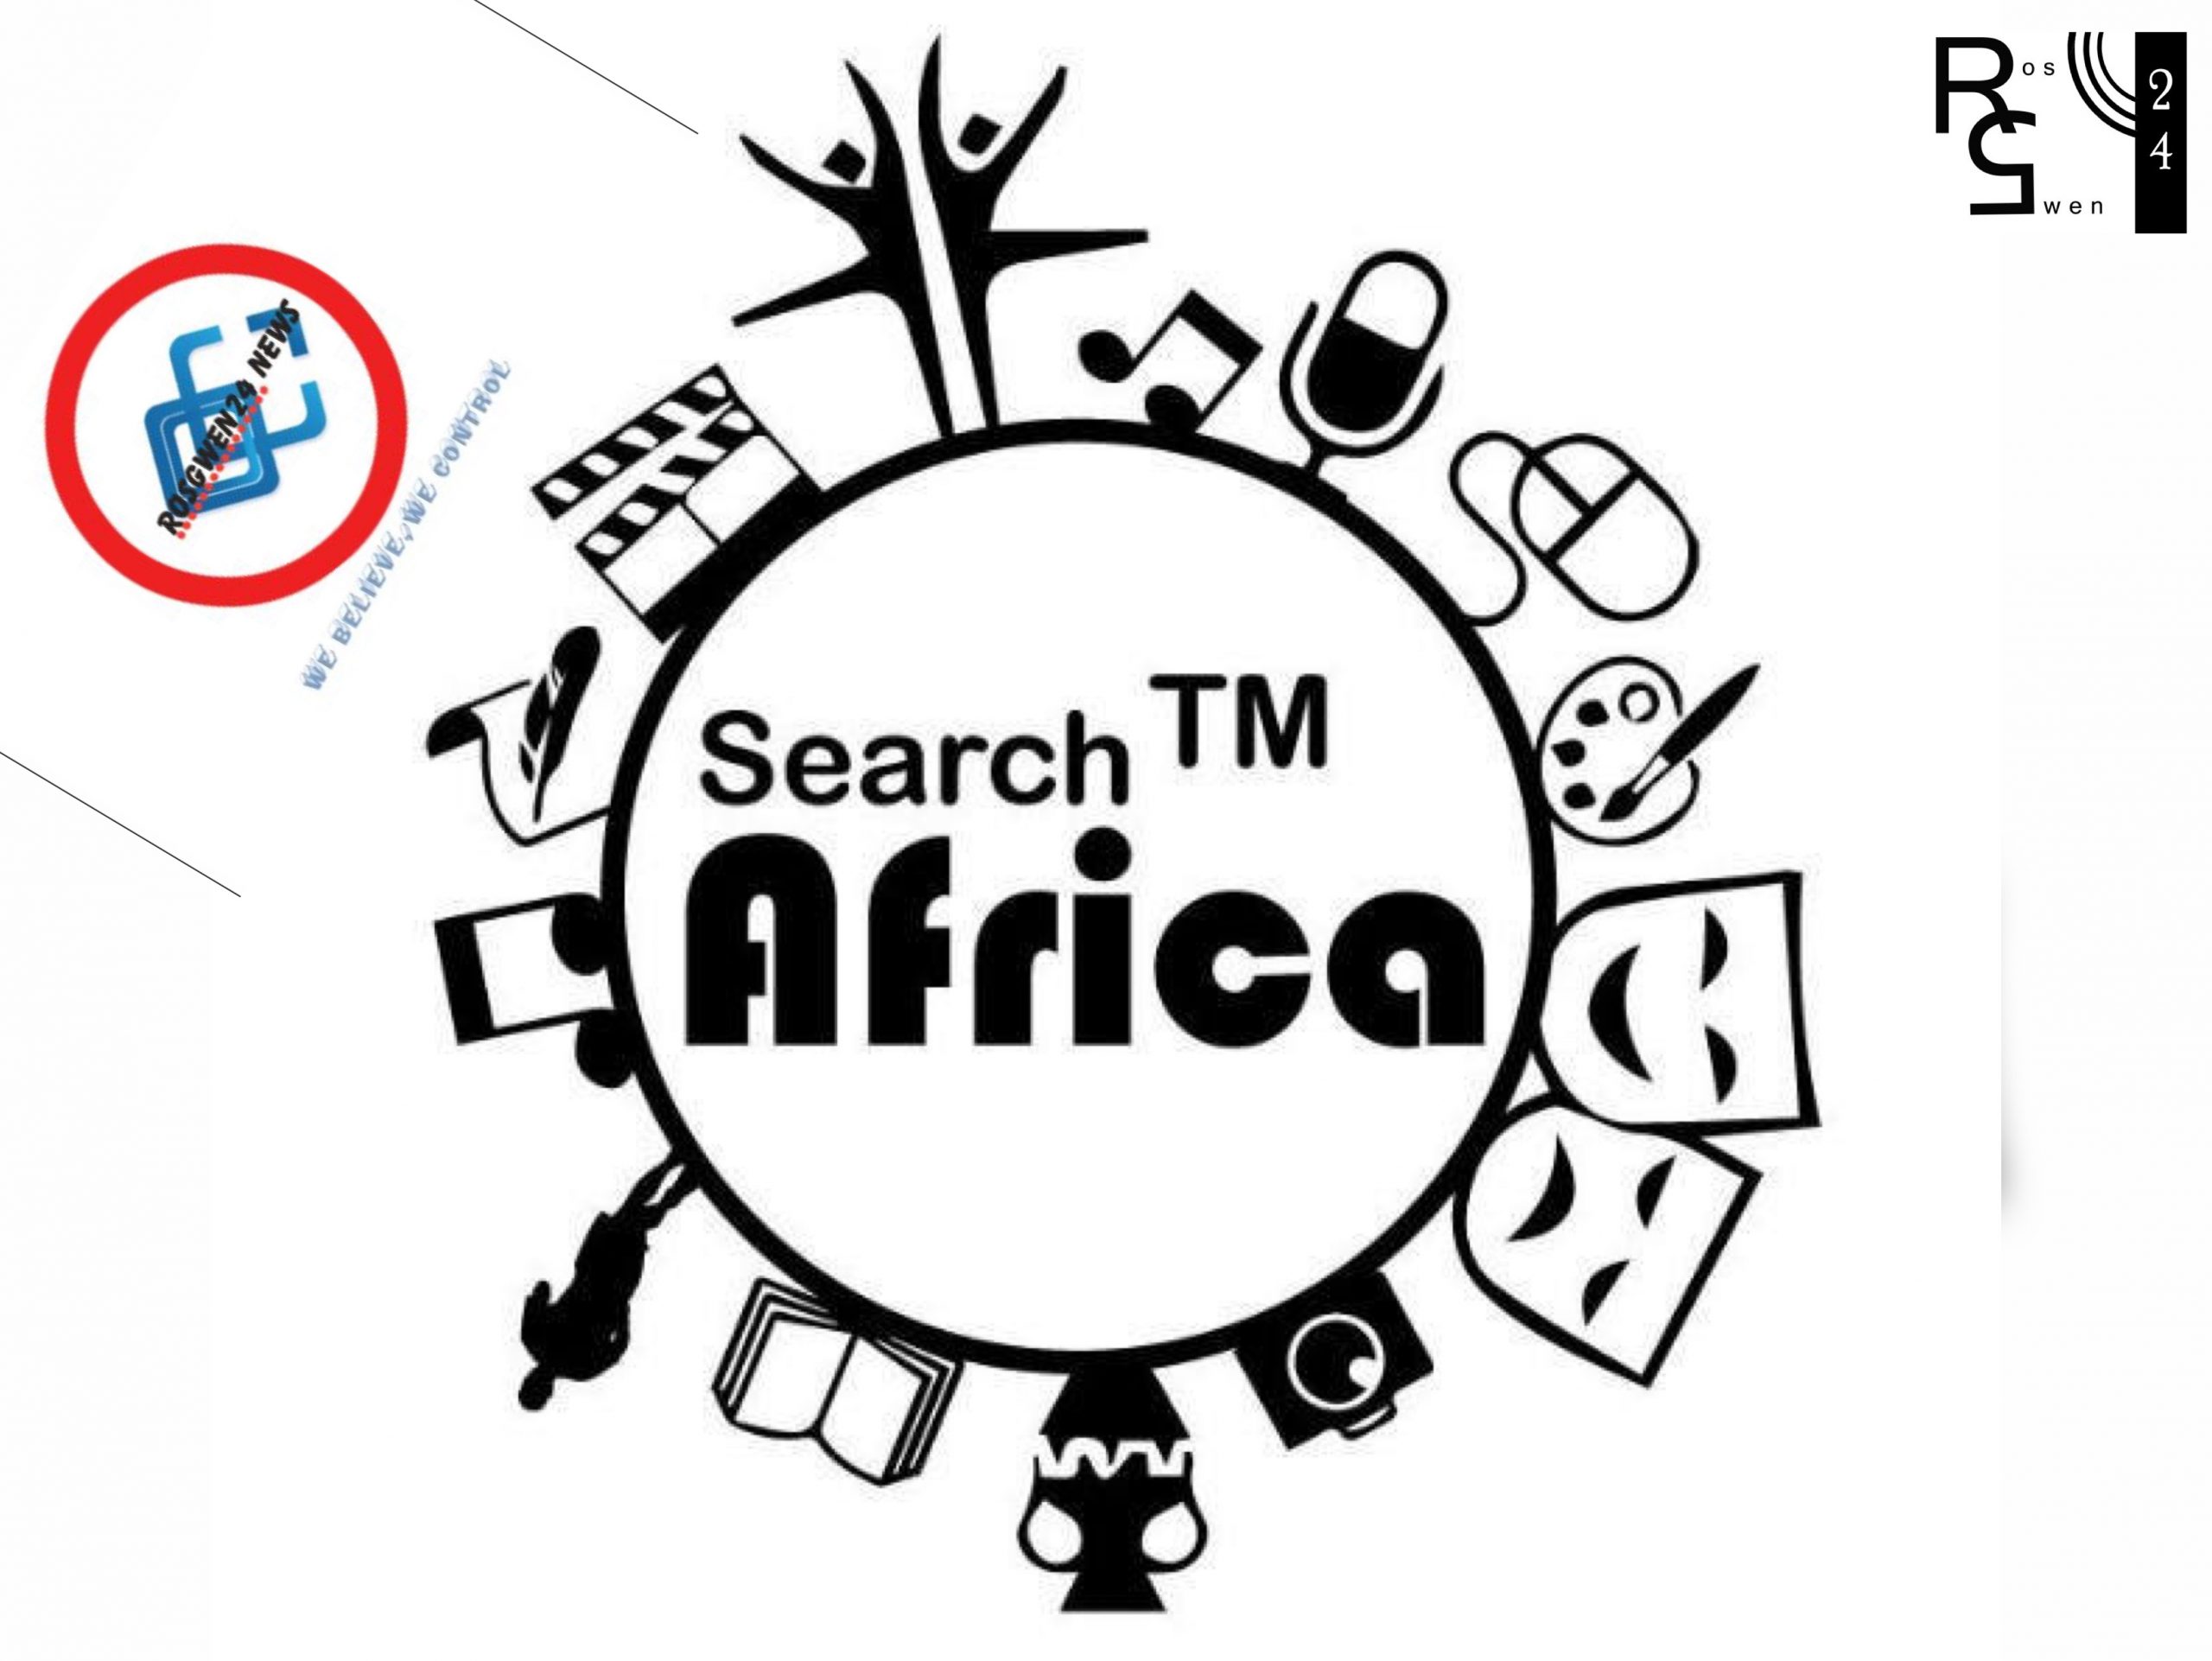 Search Africa has revealed plans to identify talented prospects across Africa